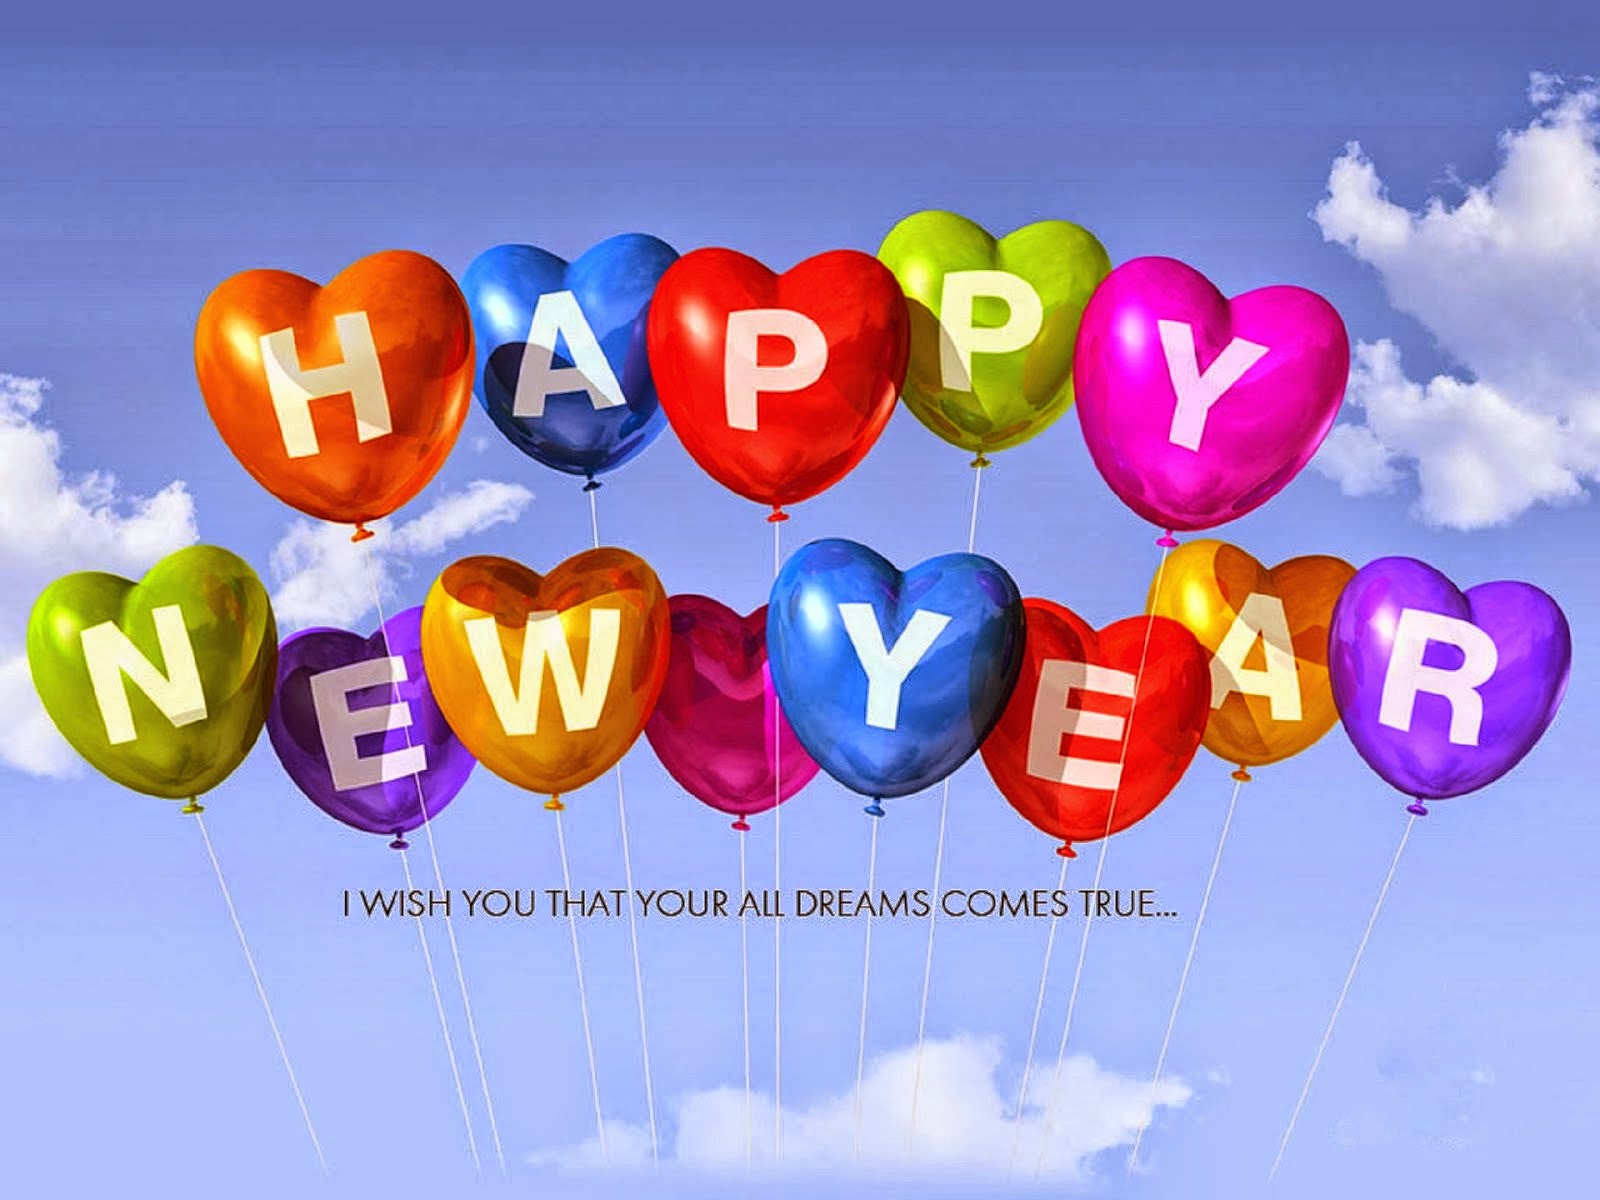 Hd wallpapers new year